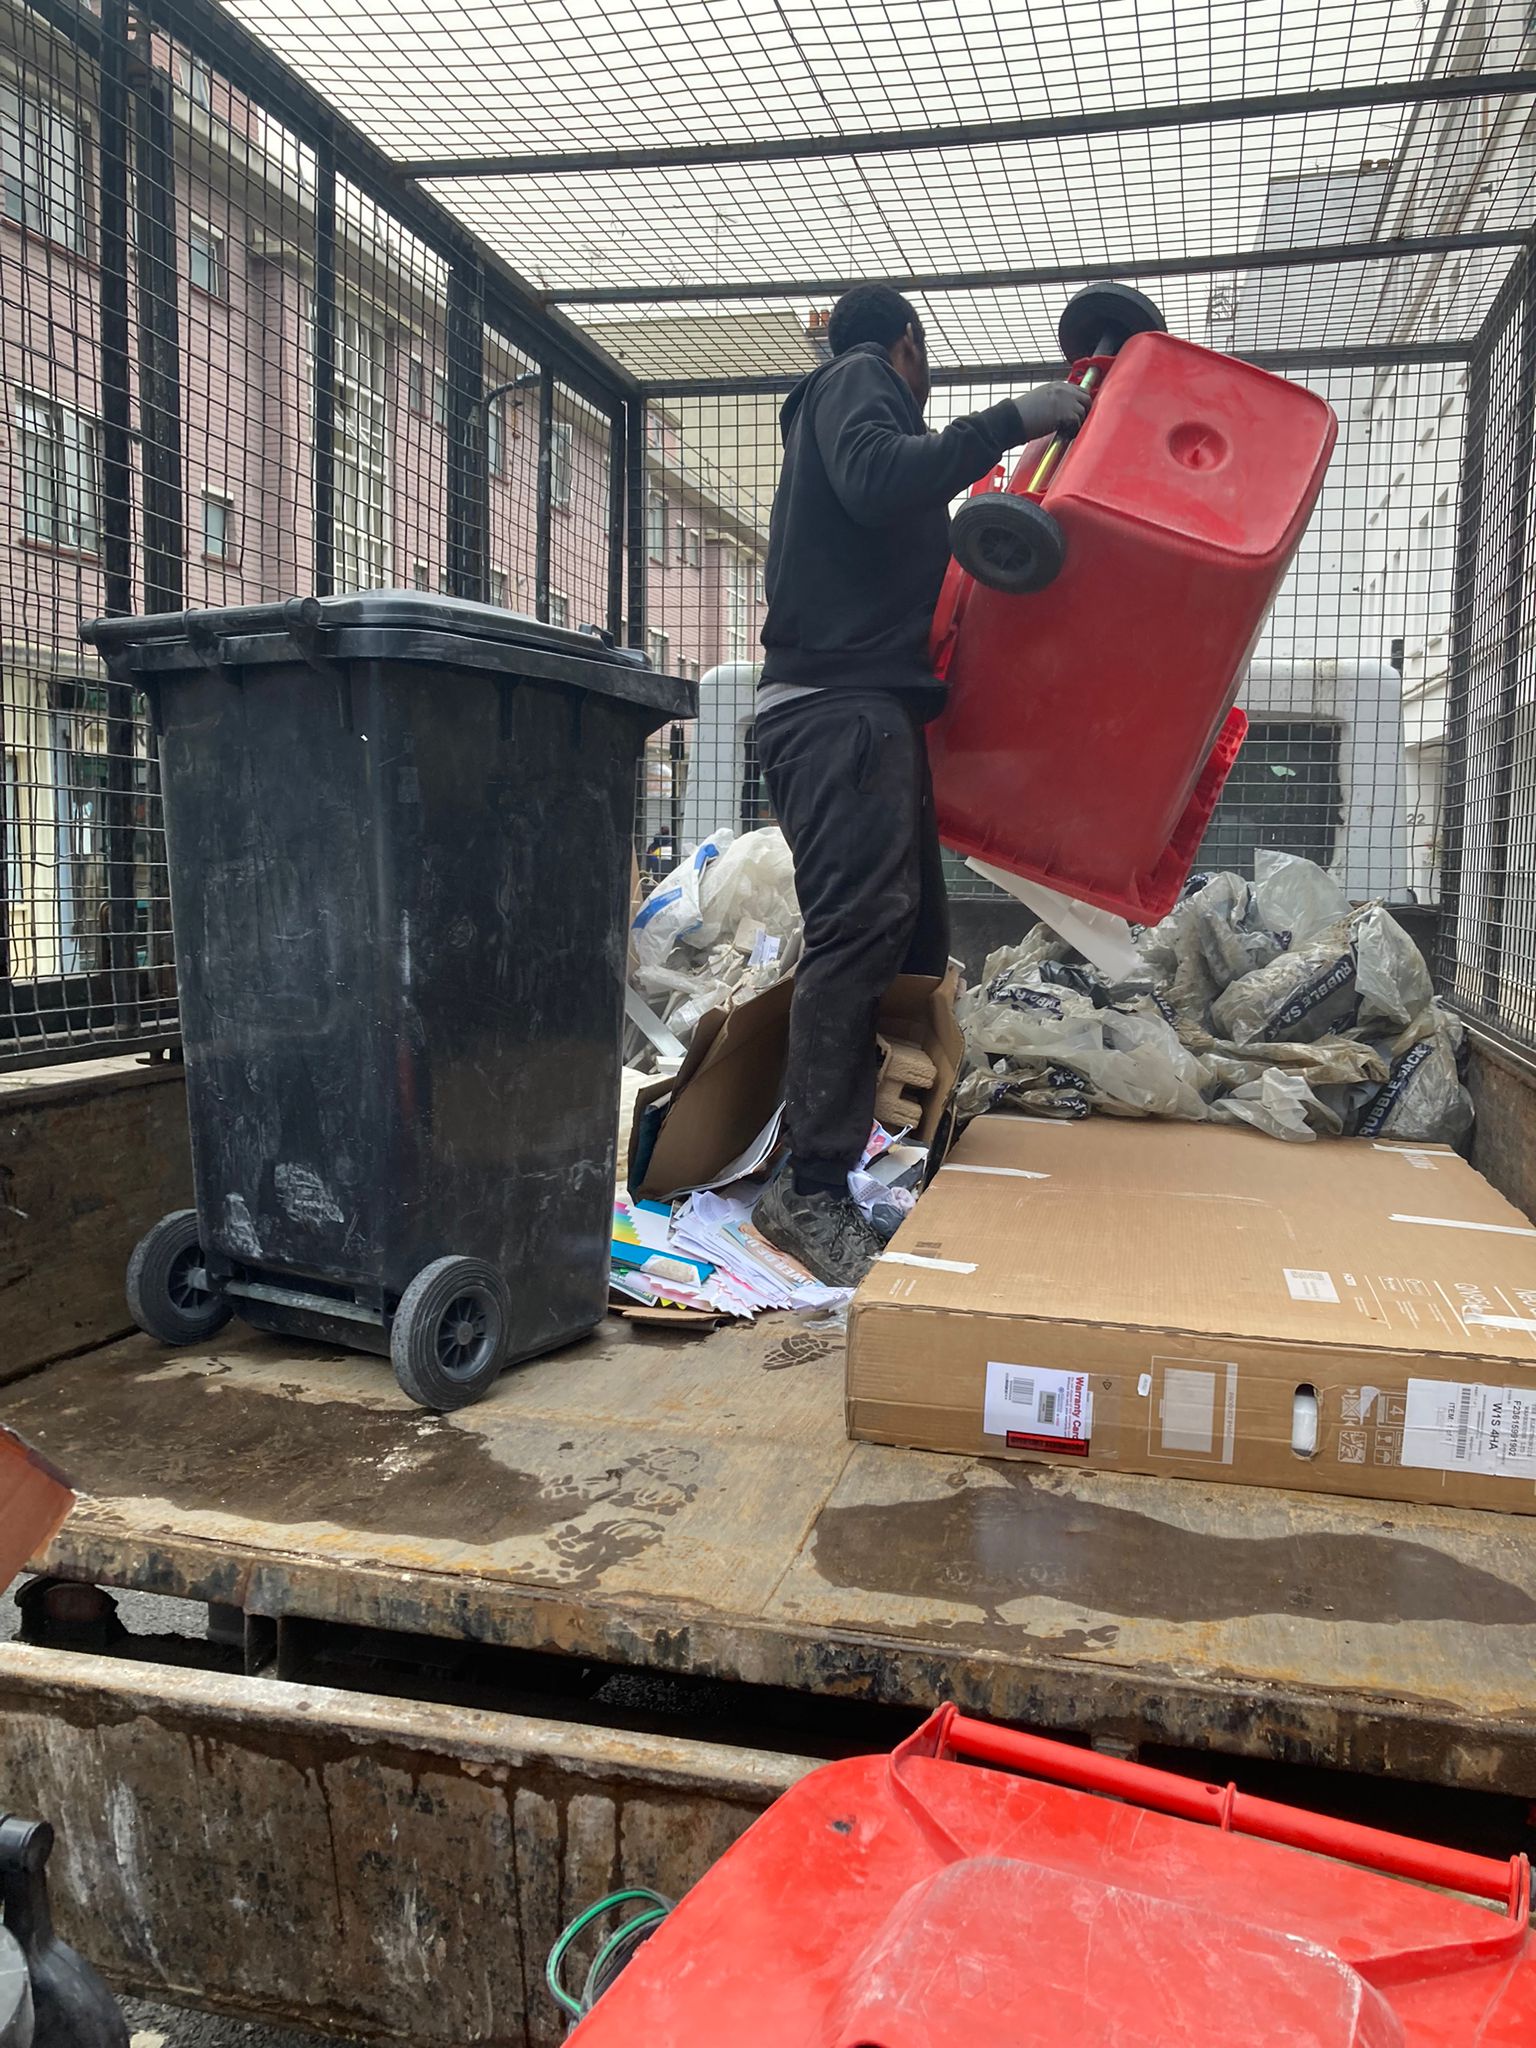 Rubbish Clearance Experts in the South East of England and London